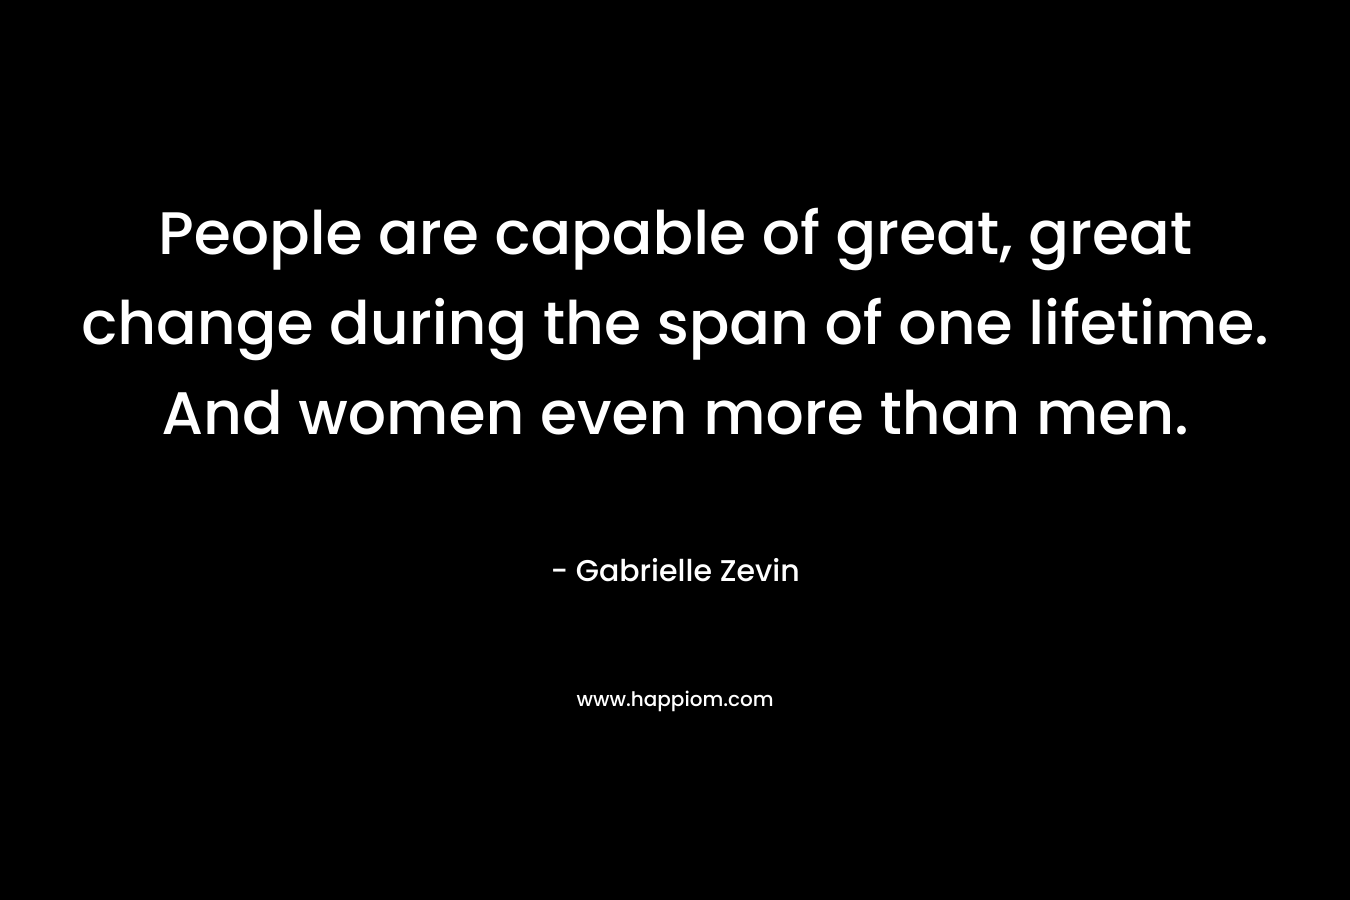 People are capable of great, great change during the span of one lifetime. And women even more than men. – Gabrielle Zevin